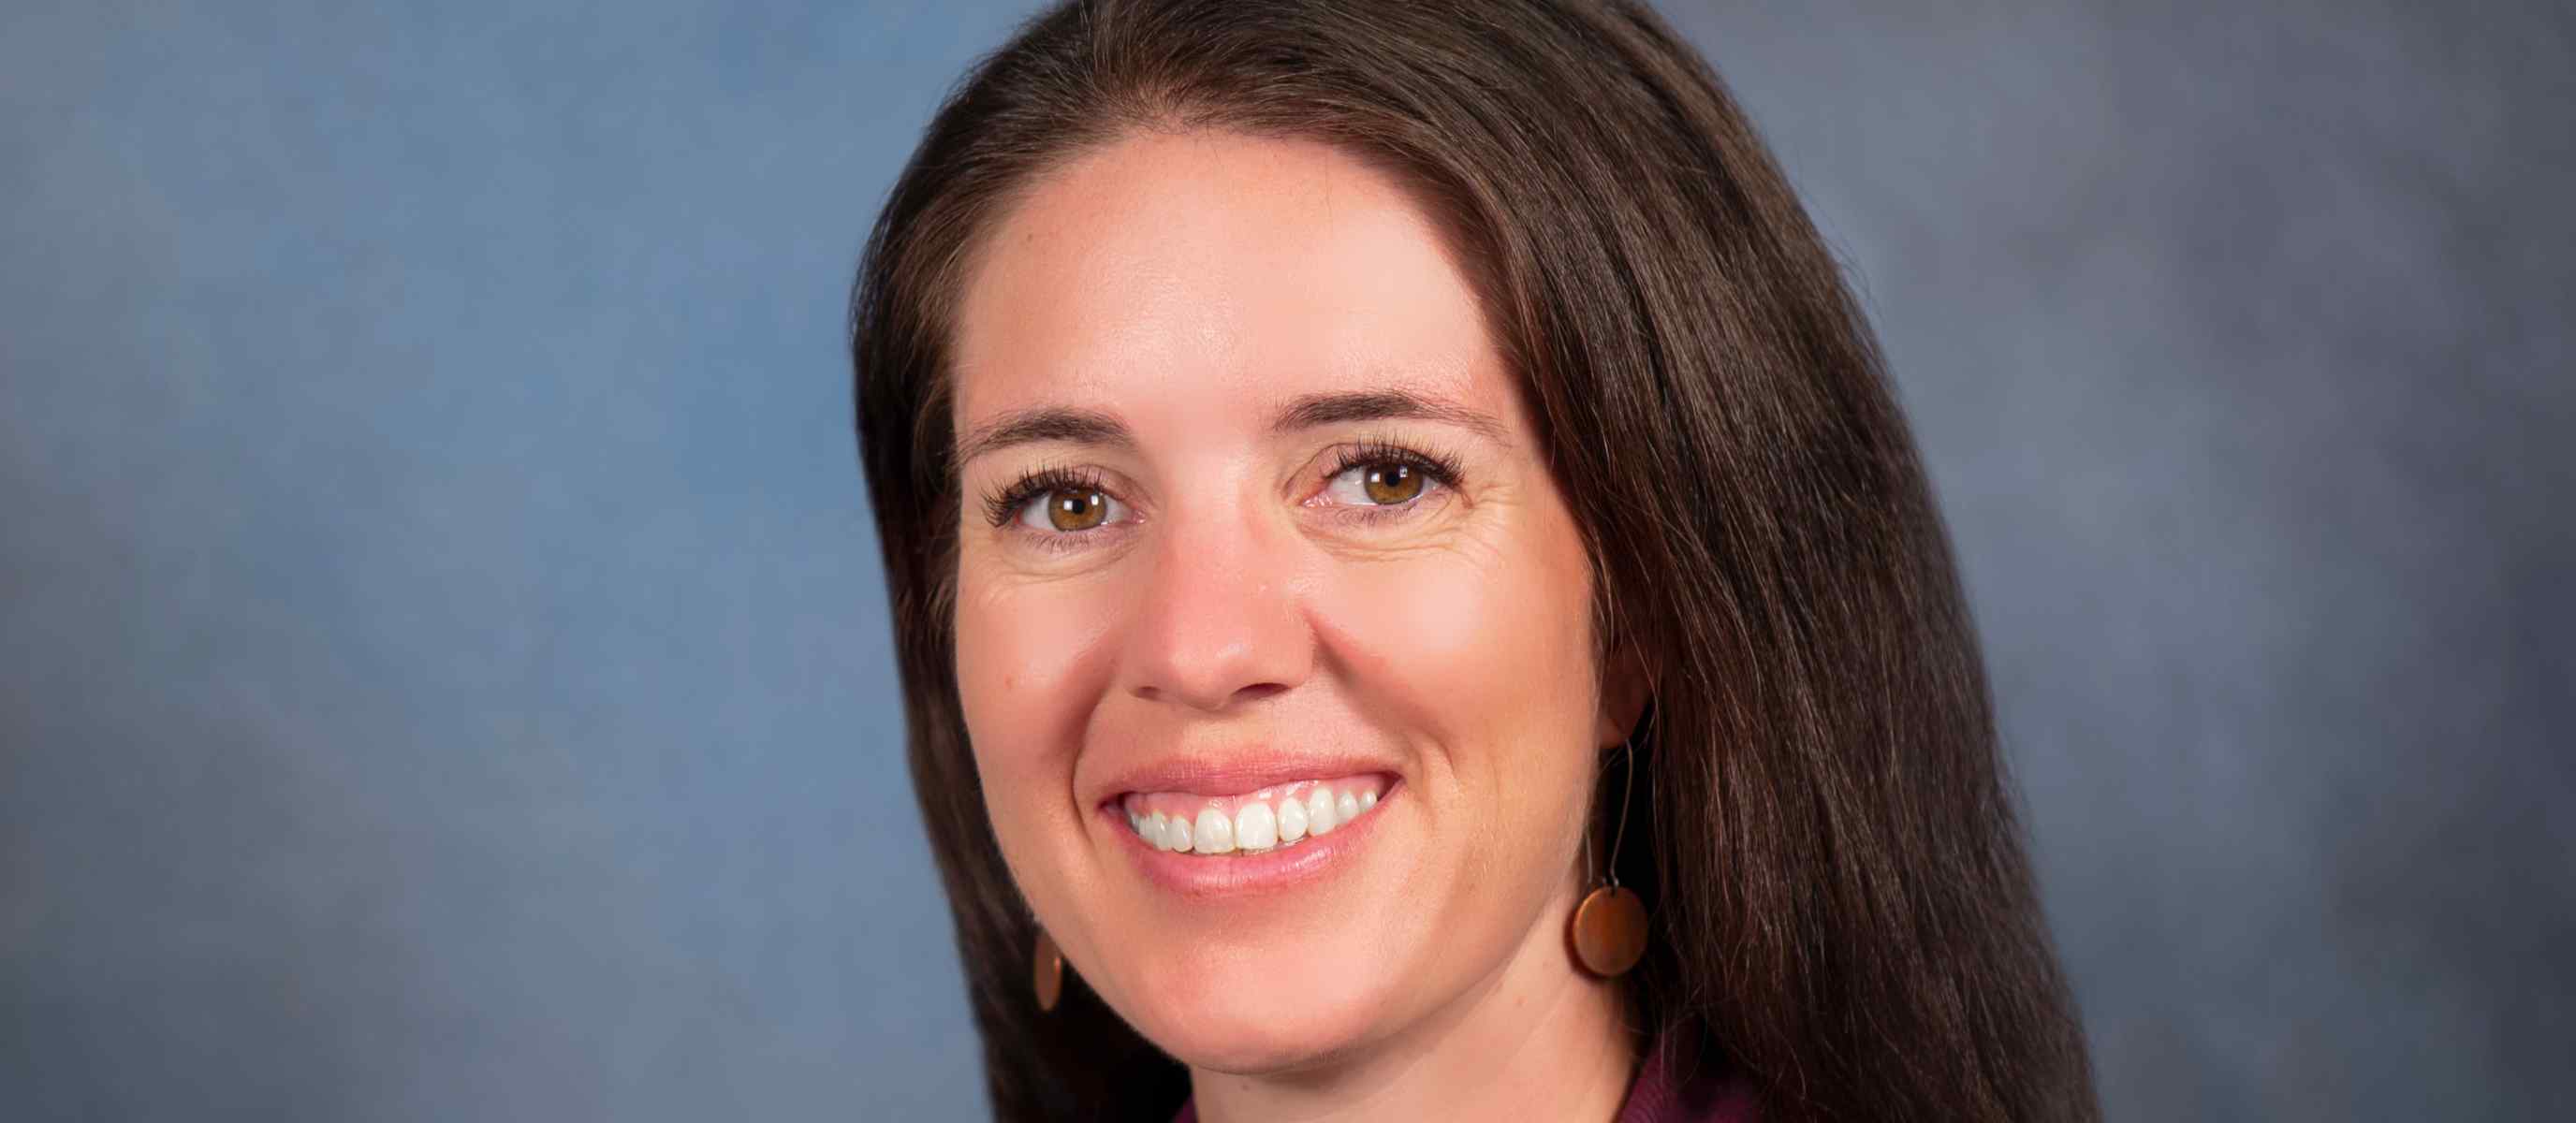 Alaska's CMO Leaving Role, Looking for New Job in Healthcare Data